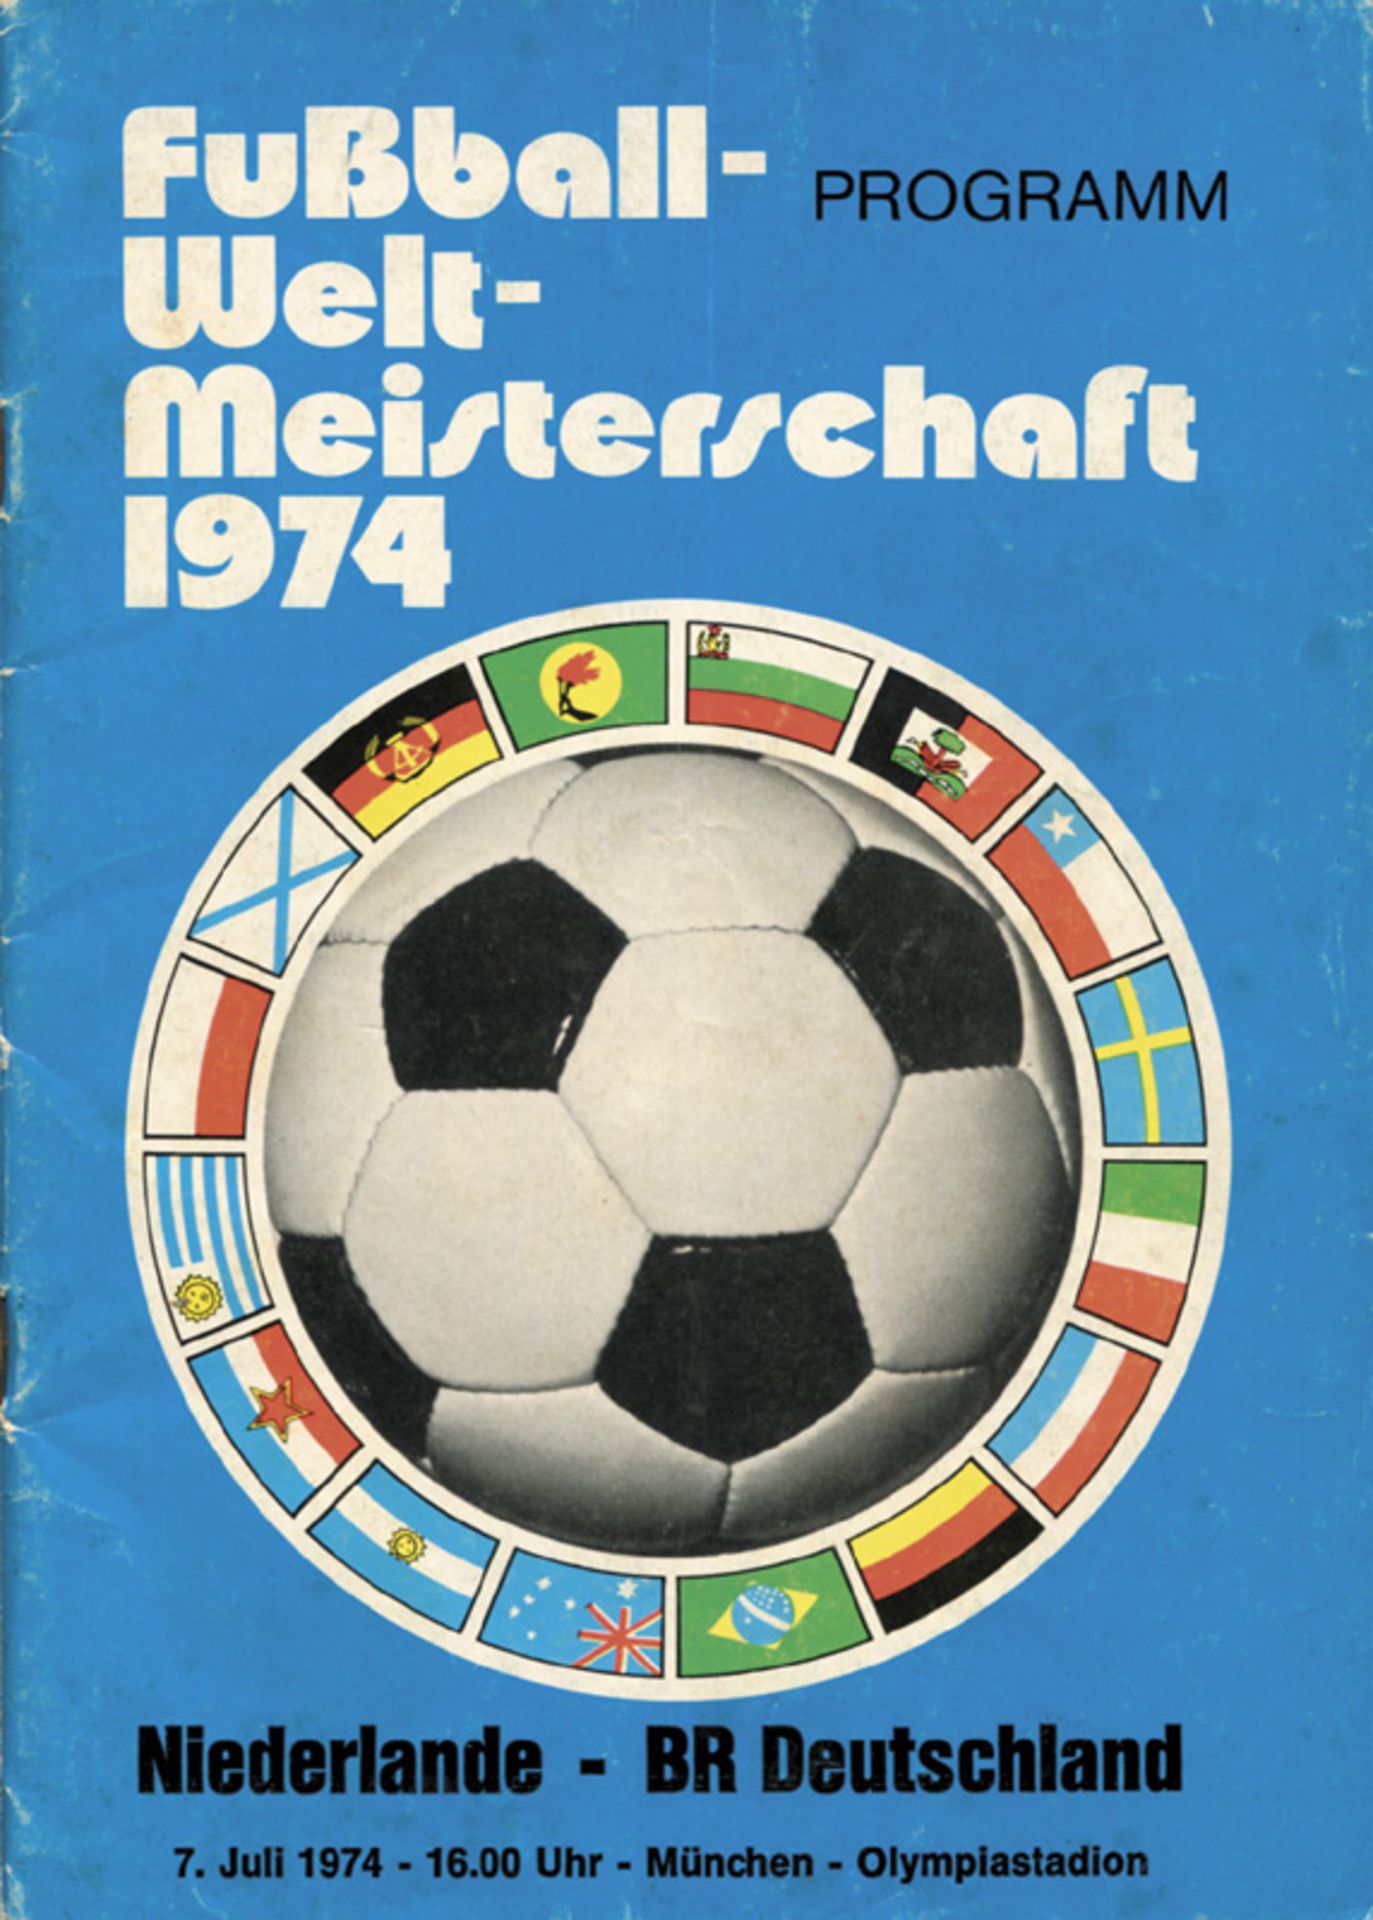 Programme: World Cup 1974. Final Germany v Nether - Germany vs Holland, Sunday, 7th July 1974 in the